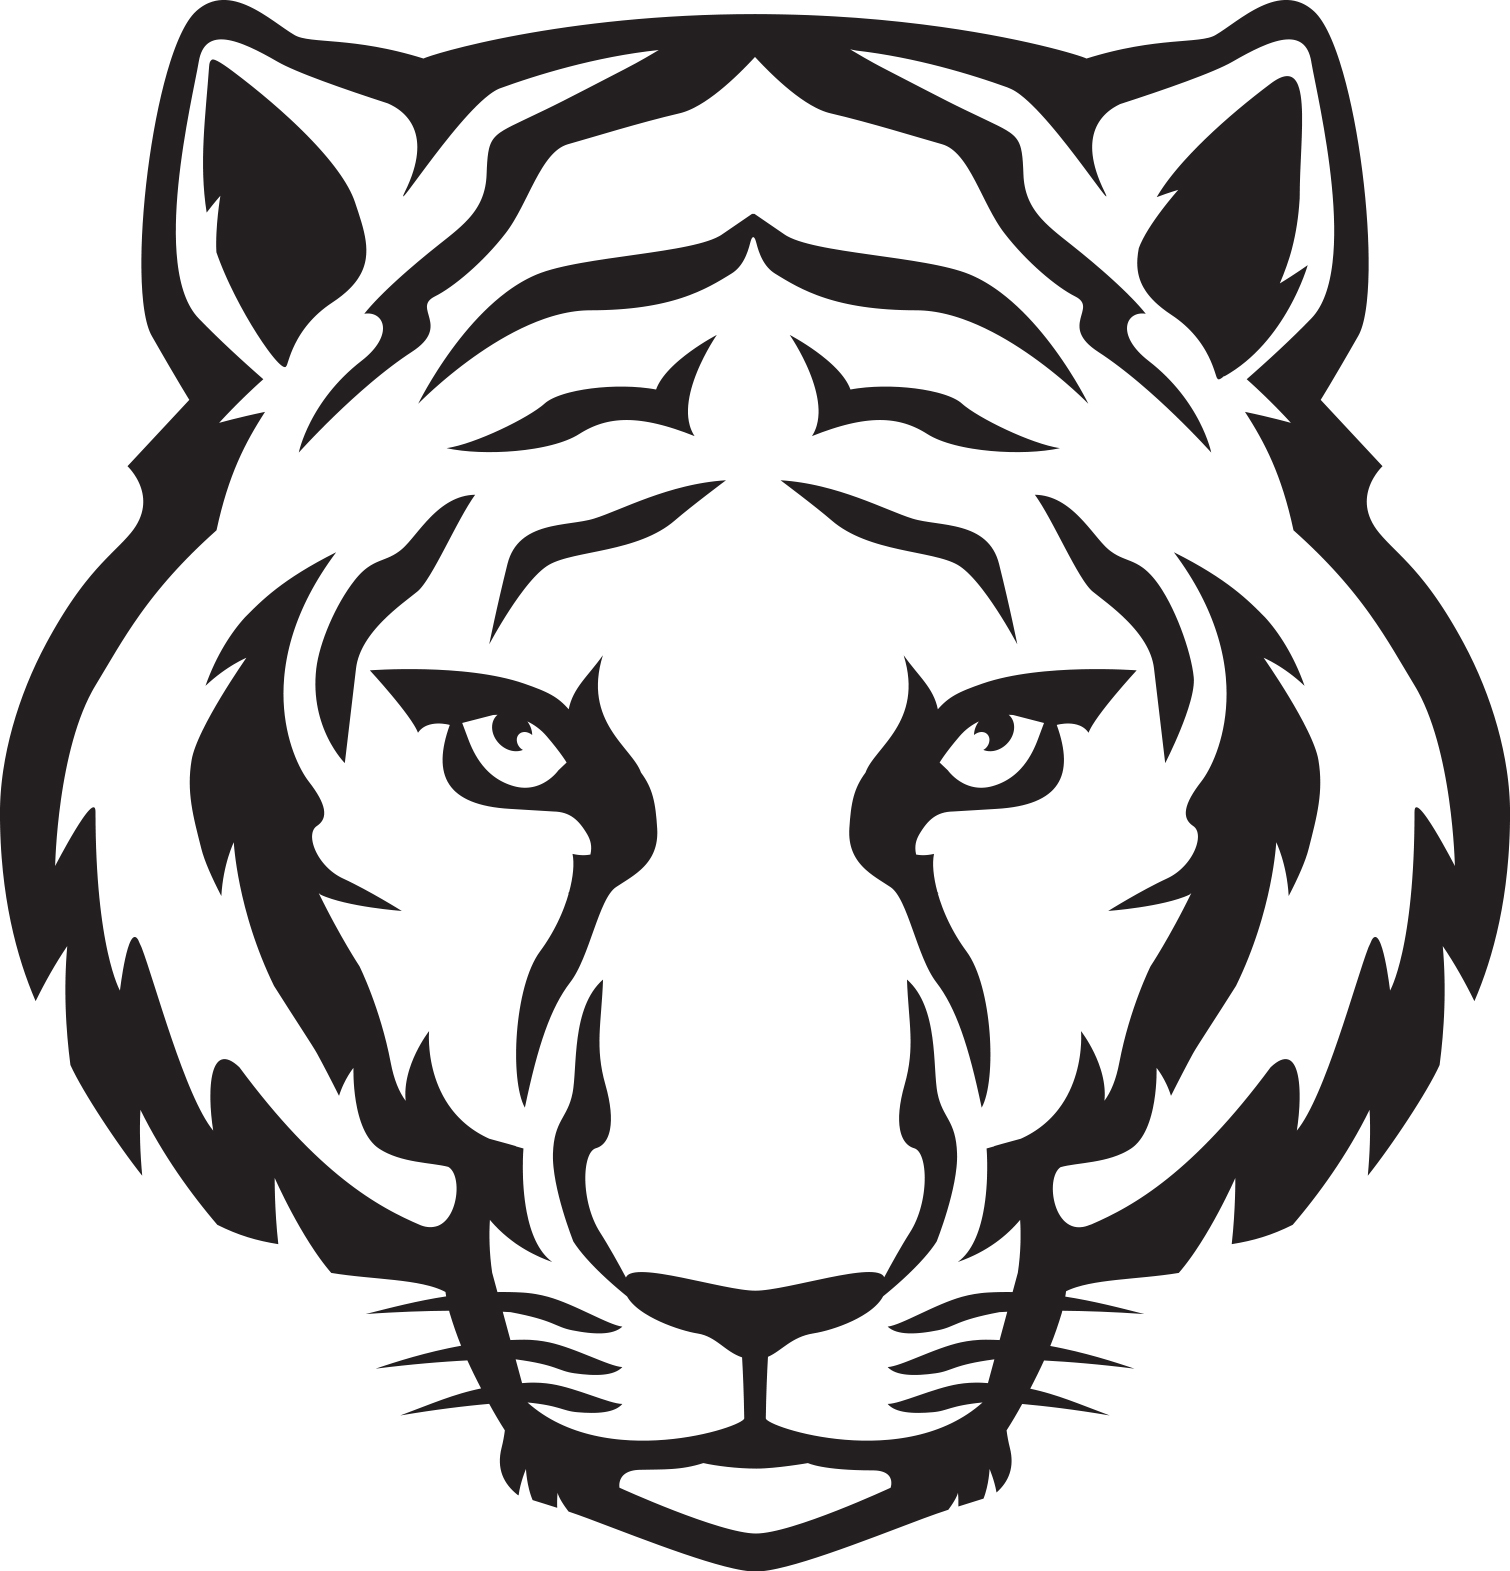 Tiger Eyes Black And White | Clipart Panda - Free Clipart Images